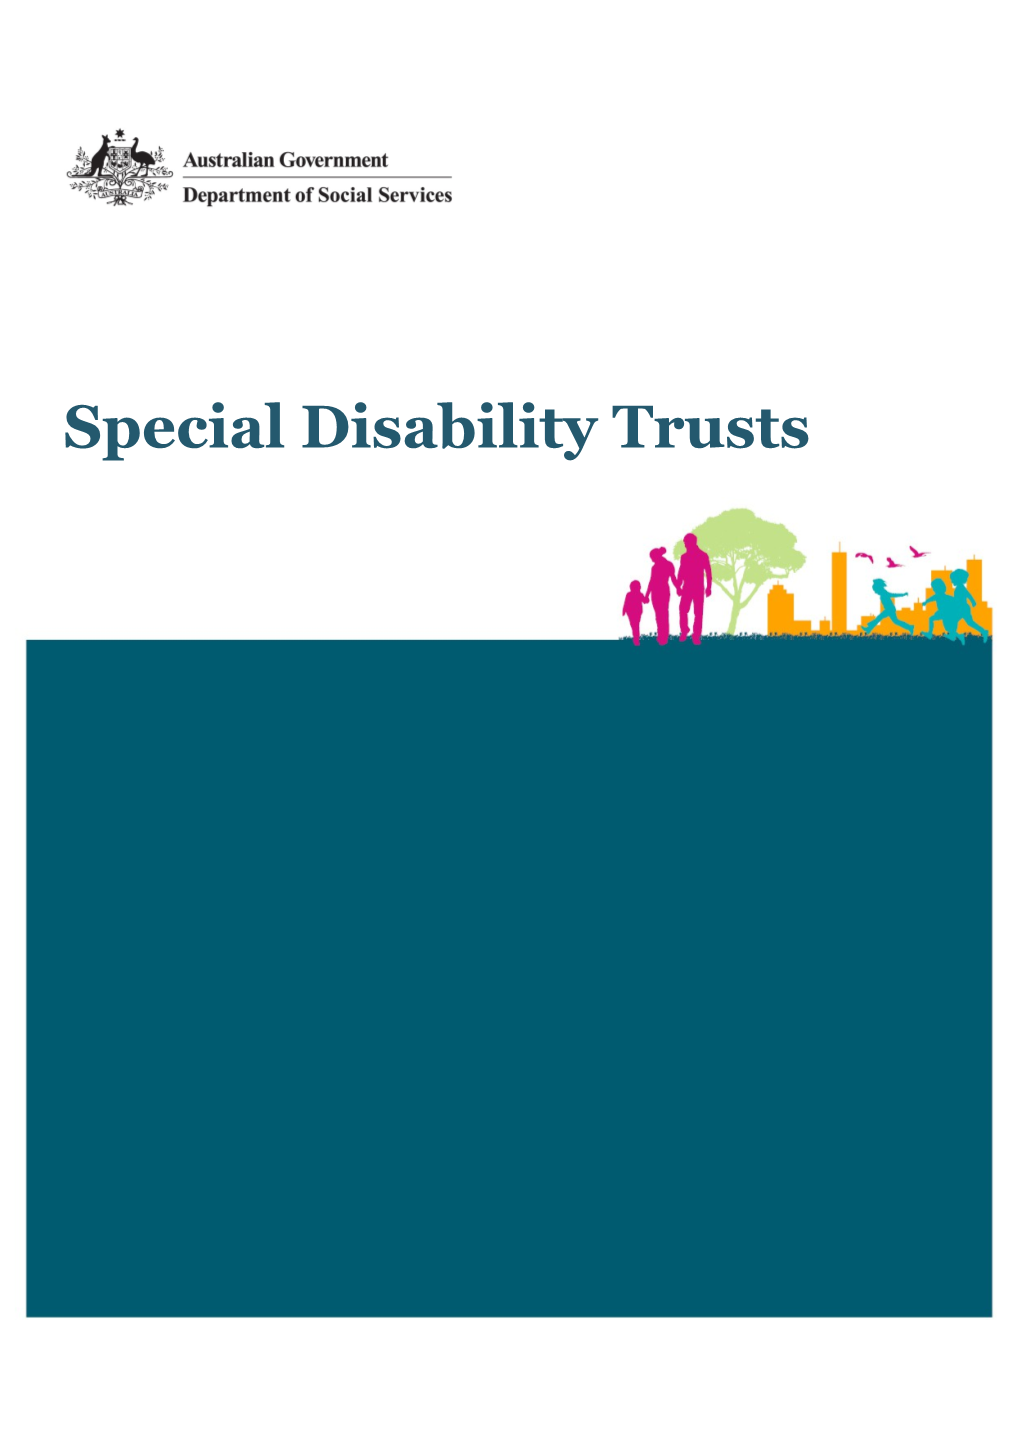 Special Disability Trusts - Questions & Answers